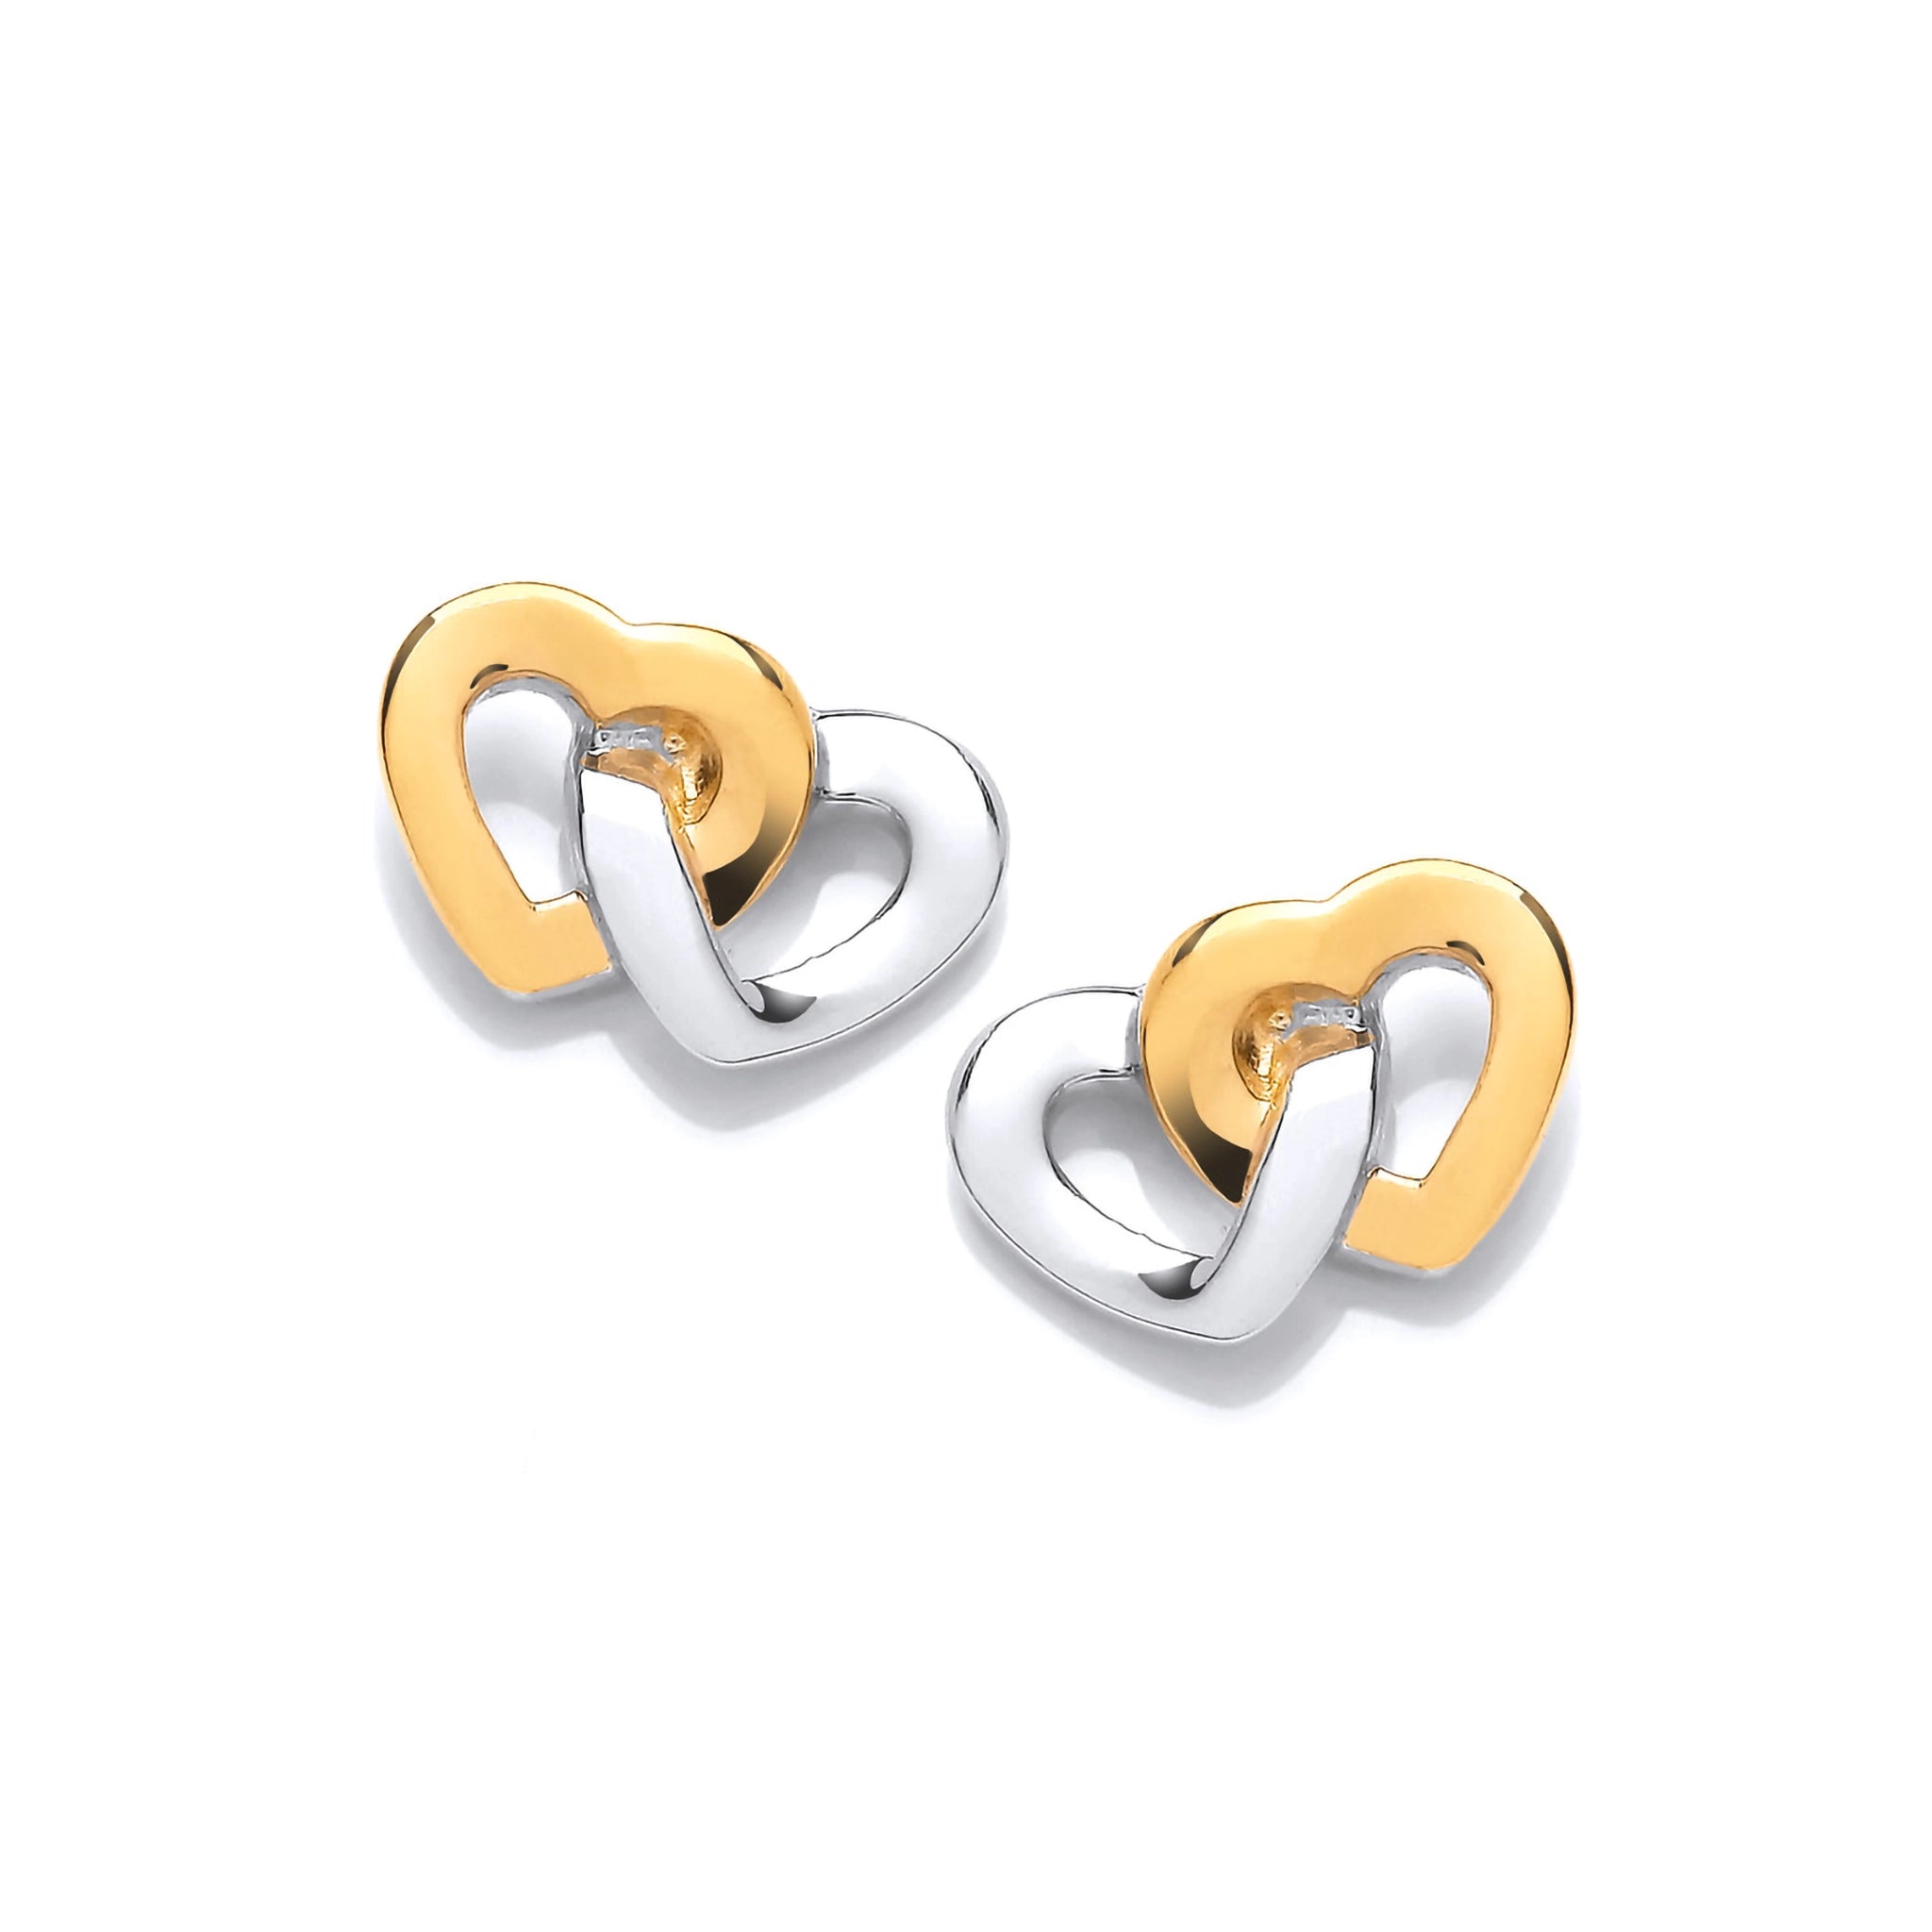 A pair of studs featuring two linked hearts, on in gold and one in silver